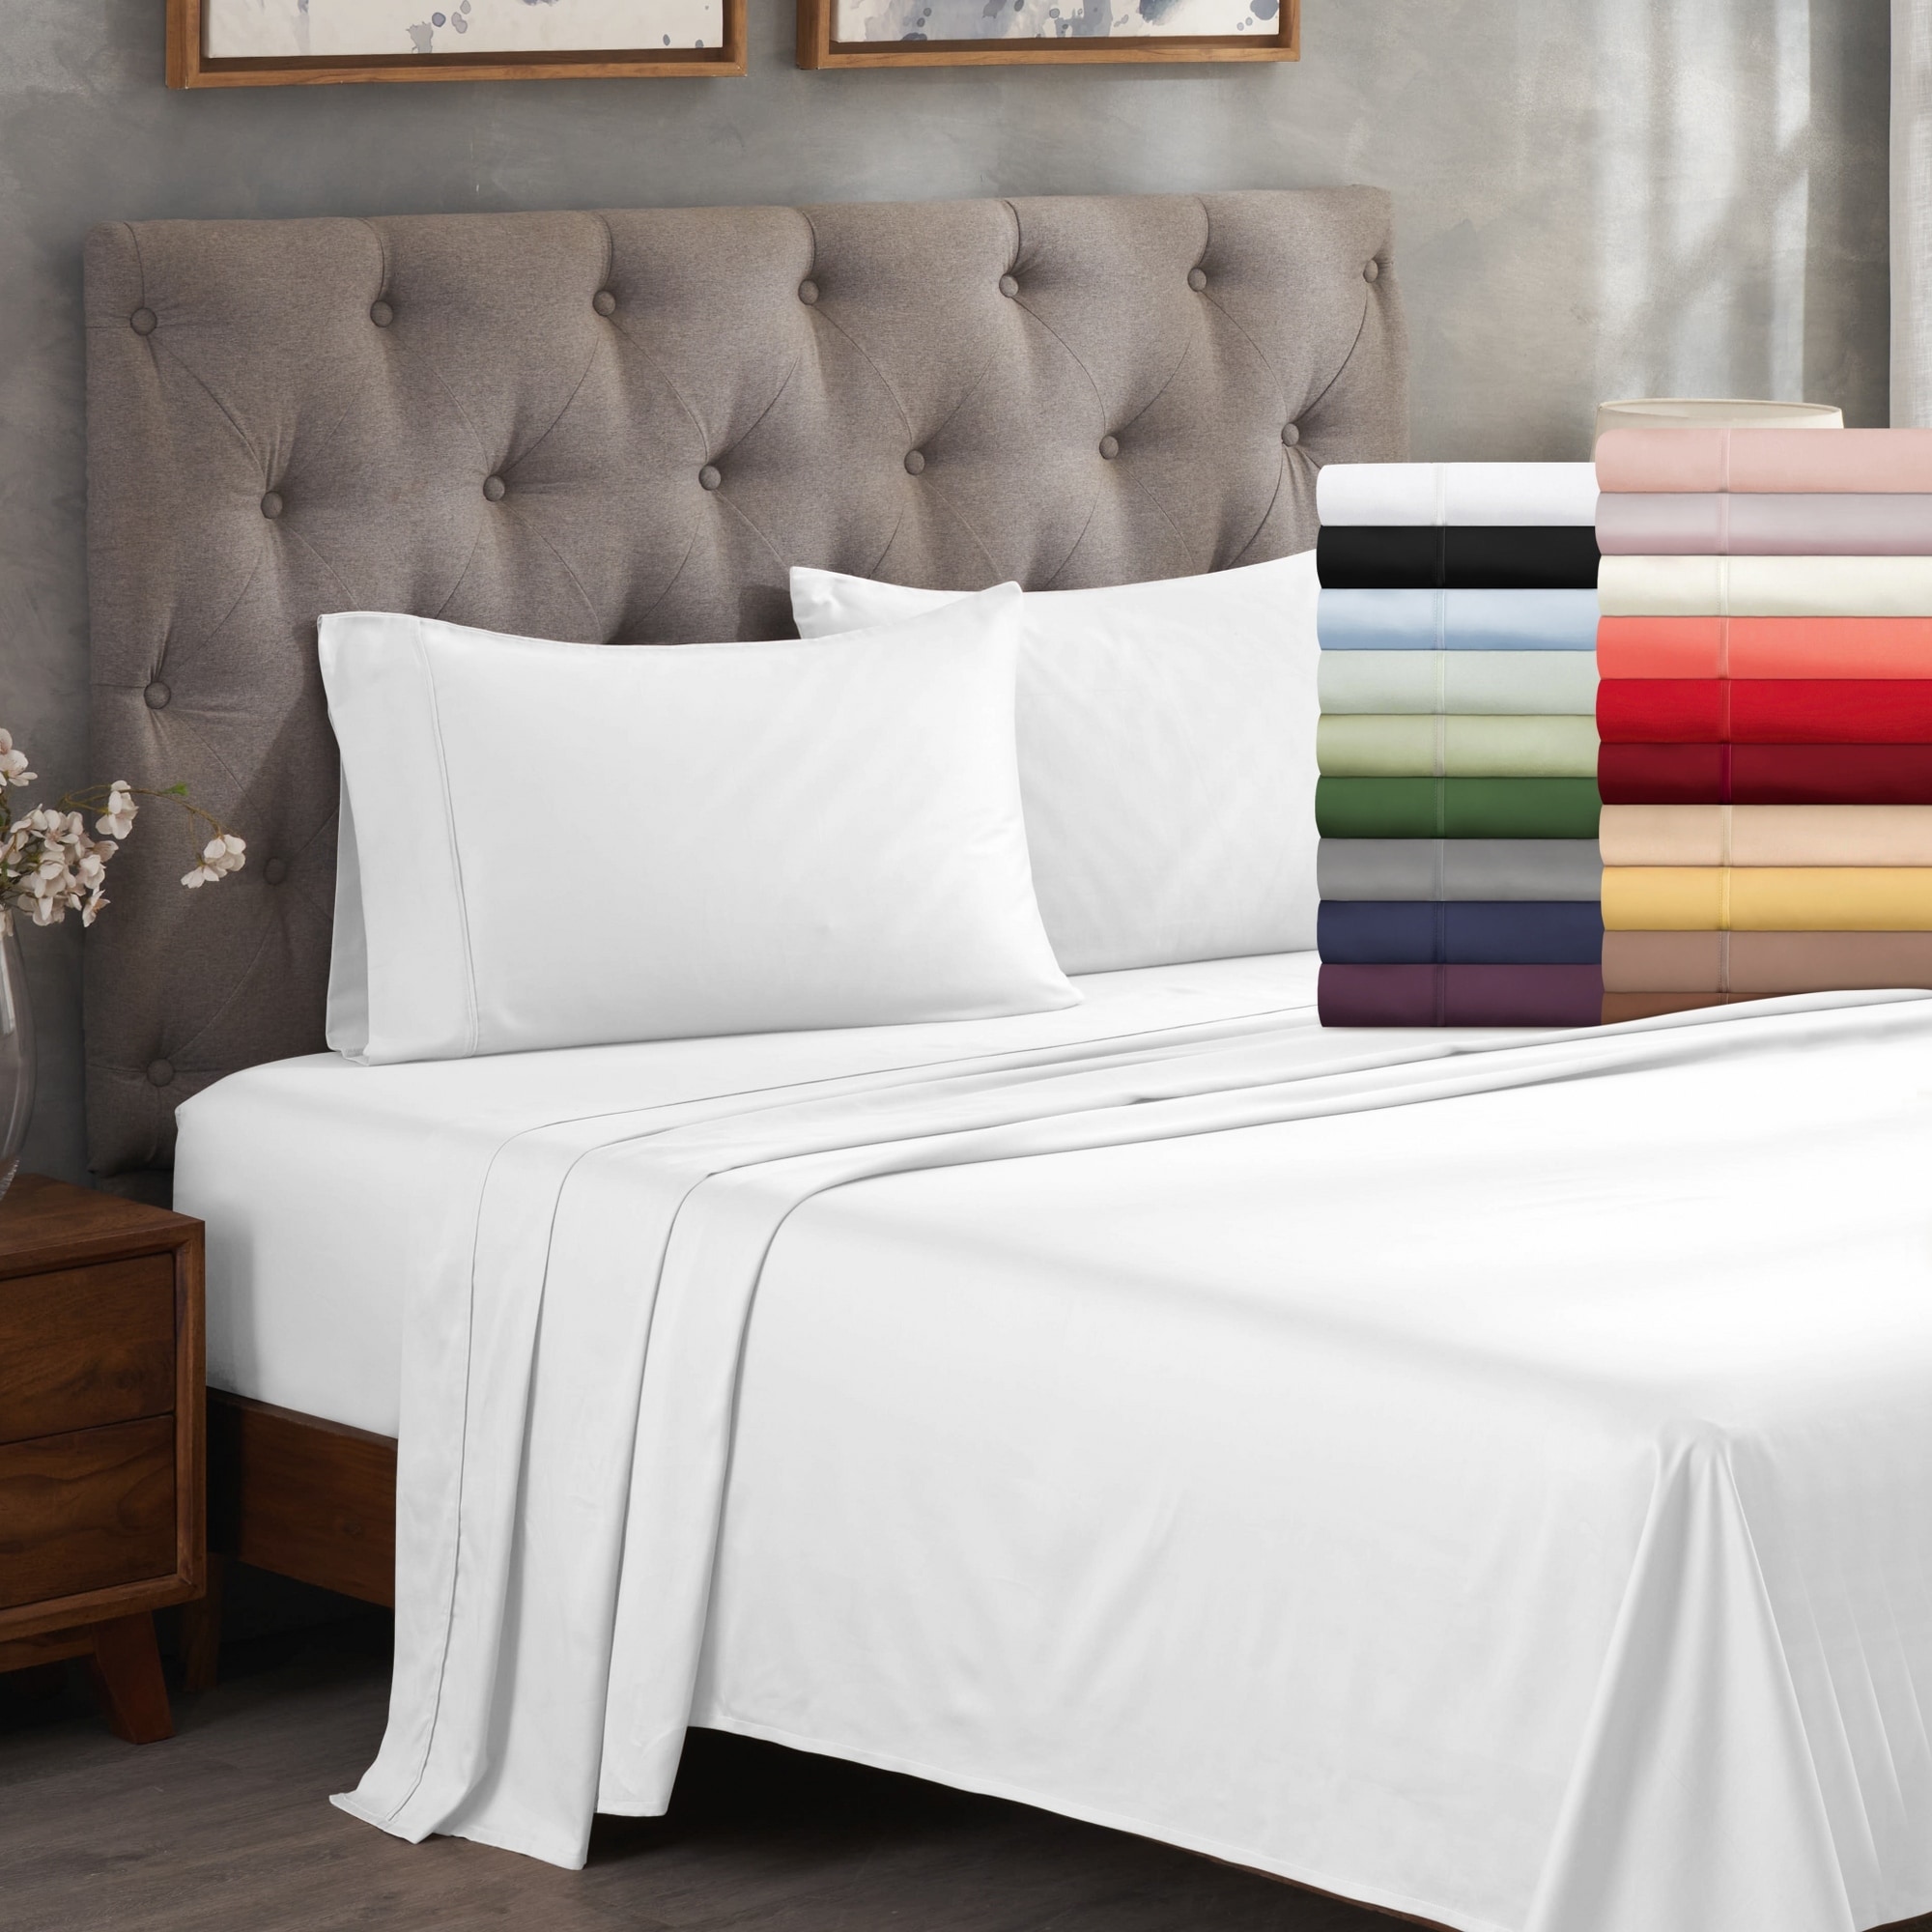 https://ak1.ostkcdn.com/images/products/is/images/direct/1ae88a89e86881be853bb7f8e2c7b71c2789ddc9/Egyptian-Cotton-300-Thread-Count-Solid-Bed-Sheet-Set-by-Superior.jpg